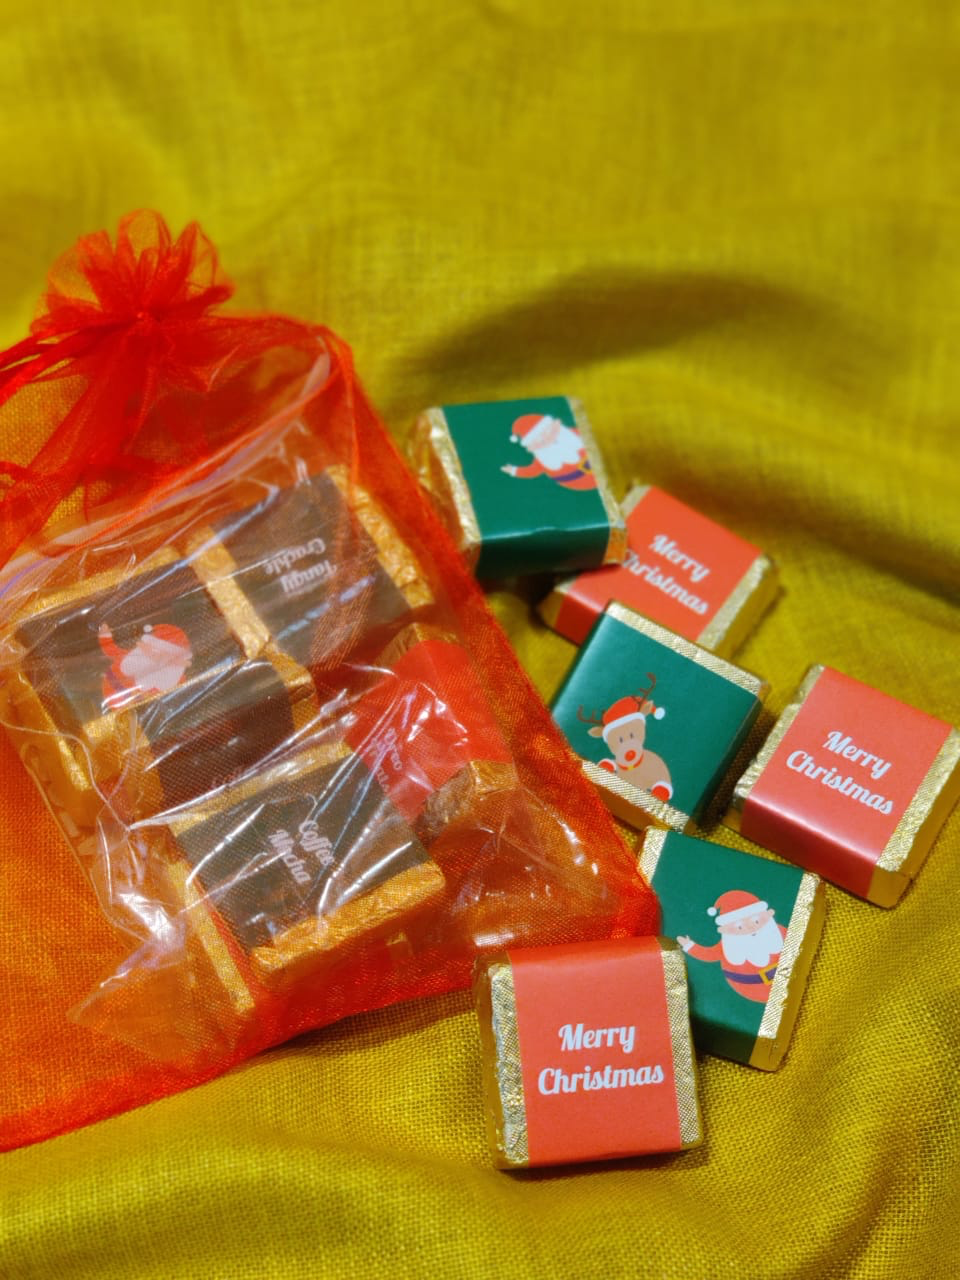 Customized Logo Chocolate Wrapper with Christmas and New Year Greeting Message 9 Chocolate Combo Gift Set - For Employees, Dealers, Customers, Stakeholders, Personal or Corporate Christmas and New Year Gifting